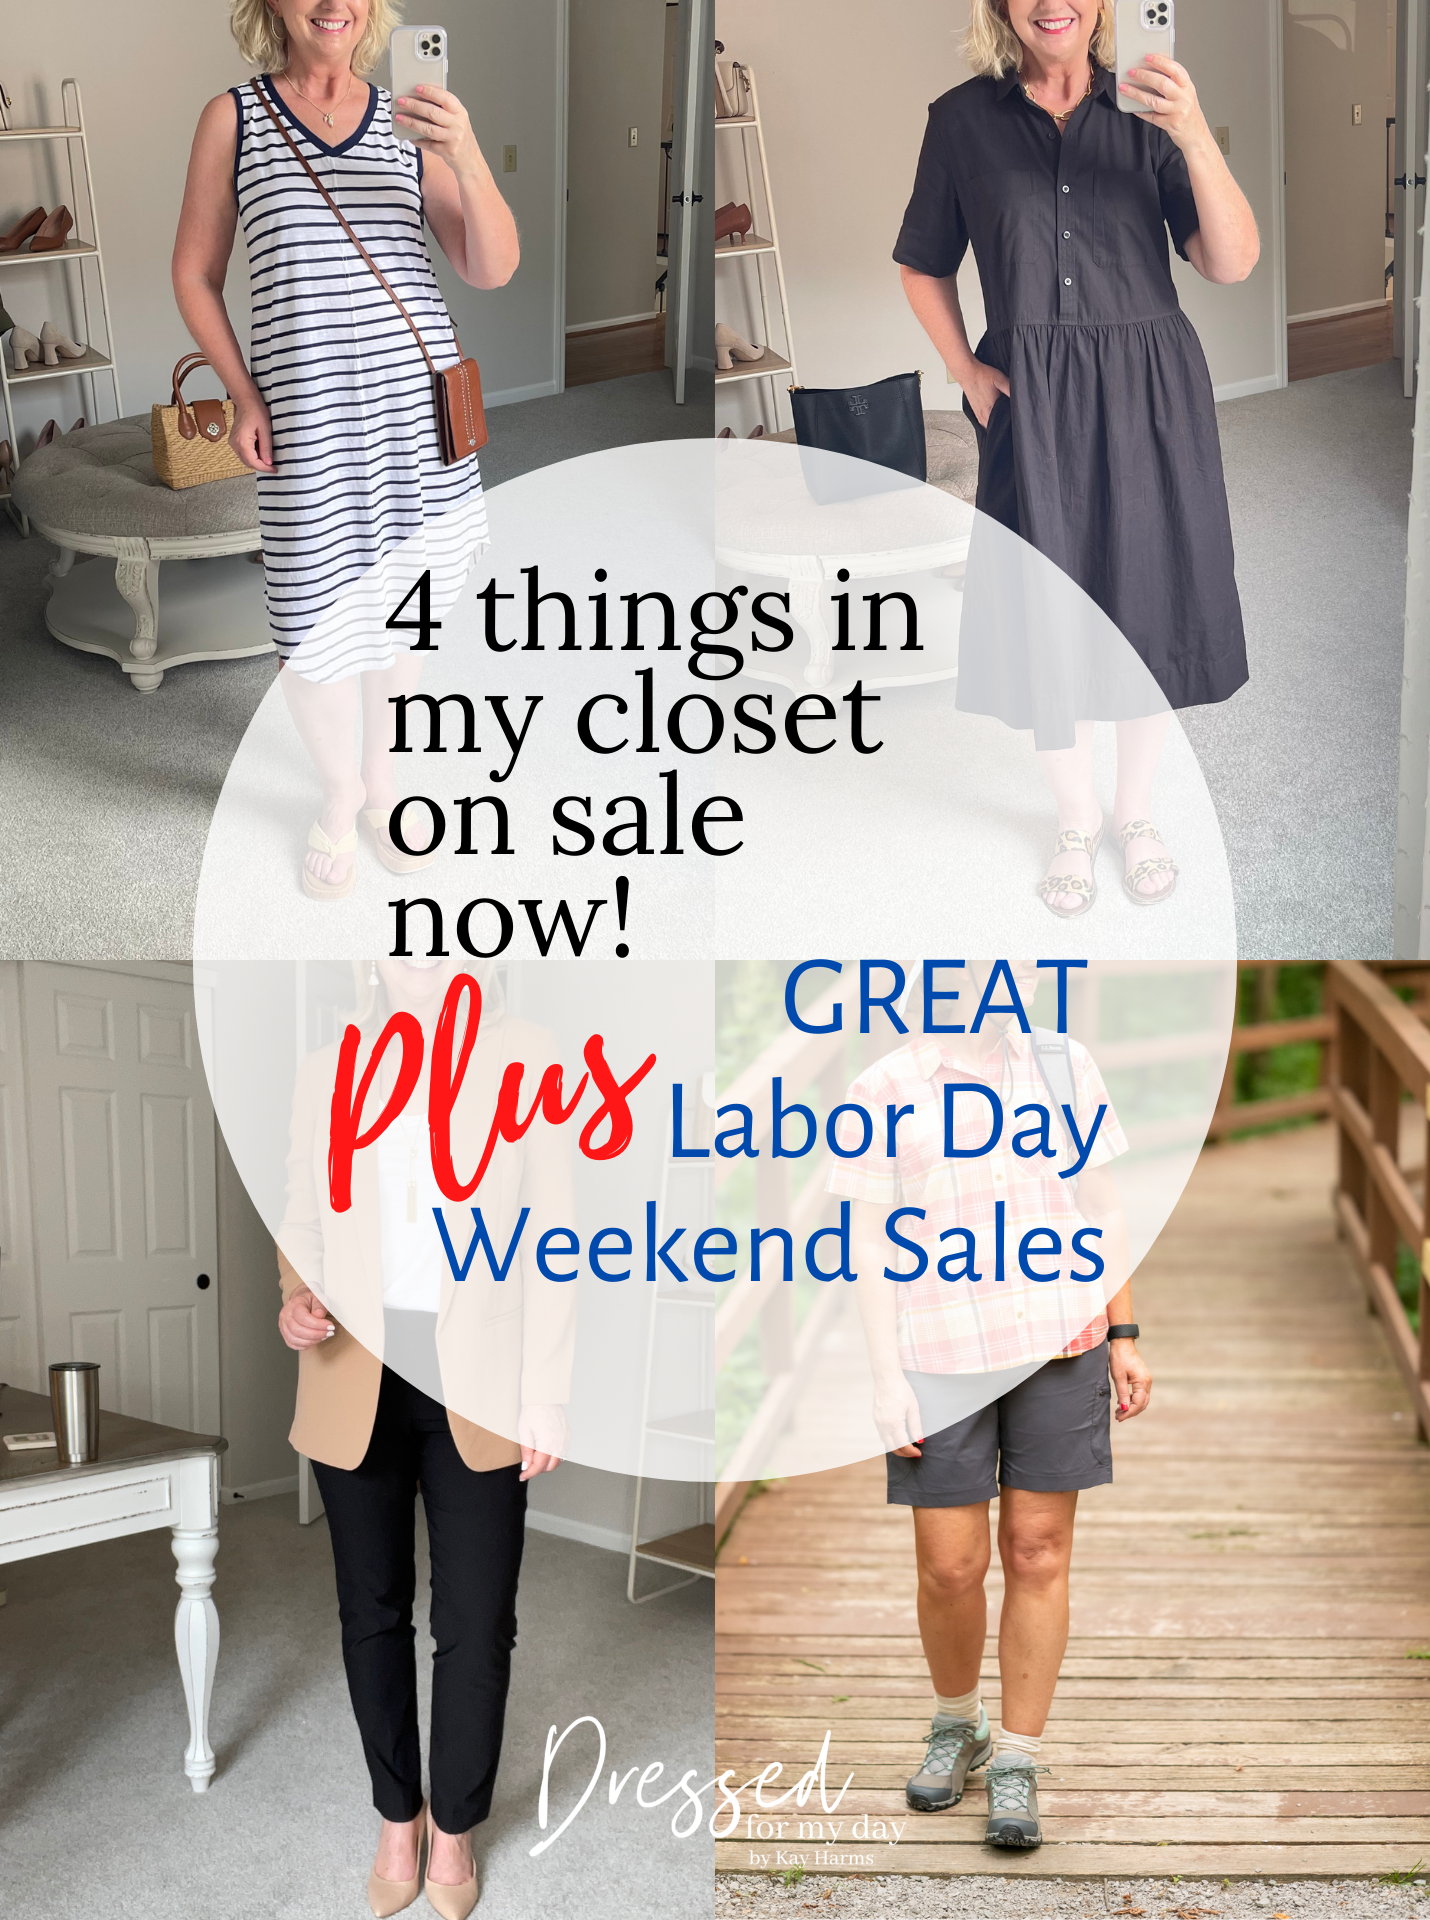 Great Labor Day Weekend Sales